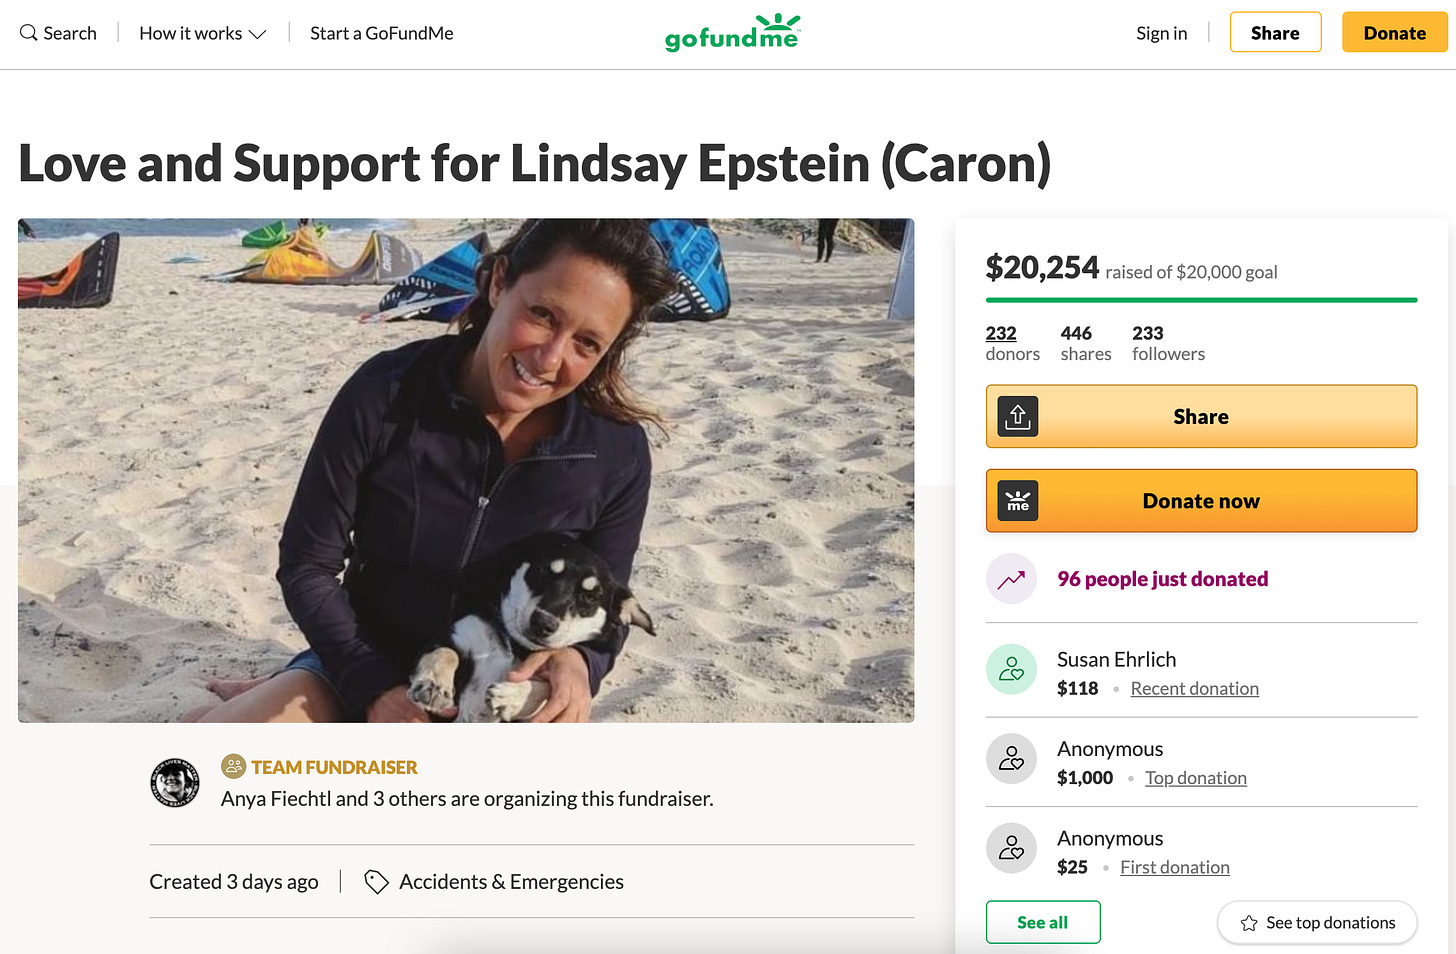 A screenshot of a woman on the beach holding a dog at the top of a GoFundMe donation page. Donations are listed on the right with a yellow button to share and another to donate now.